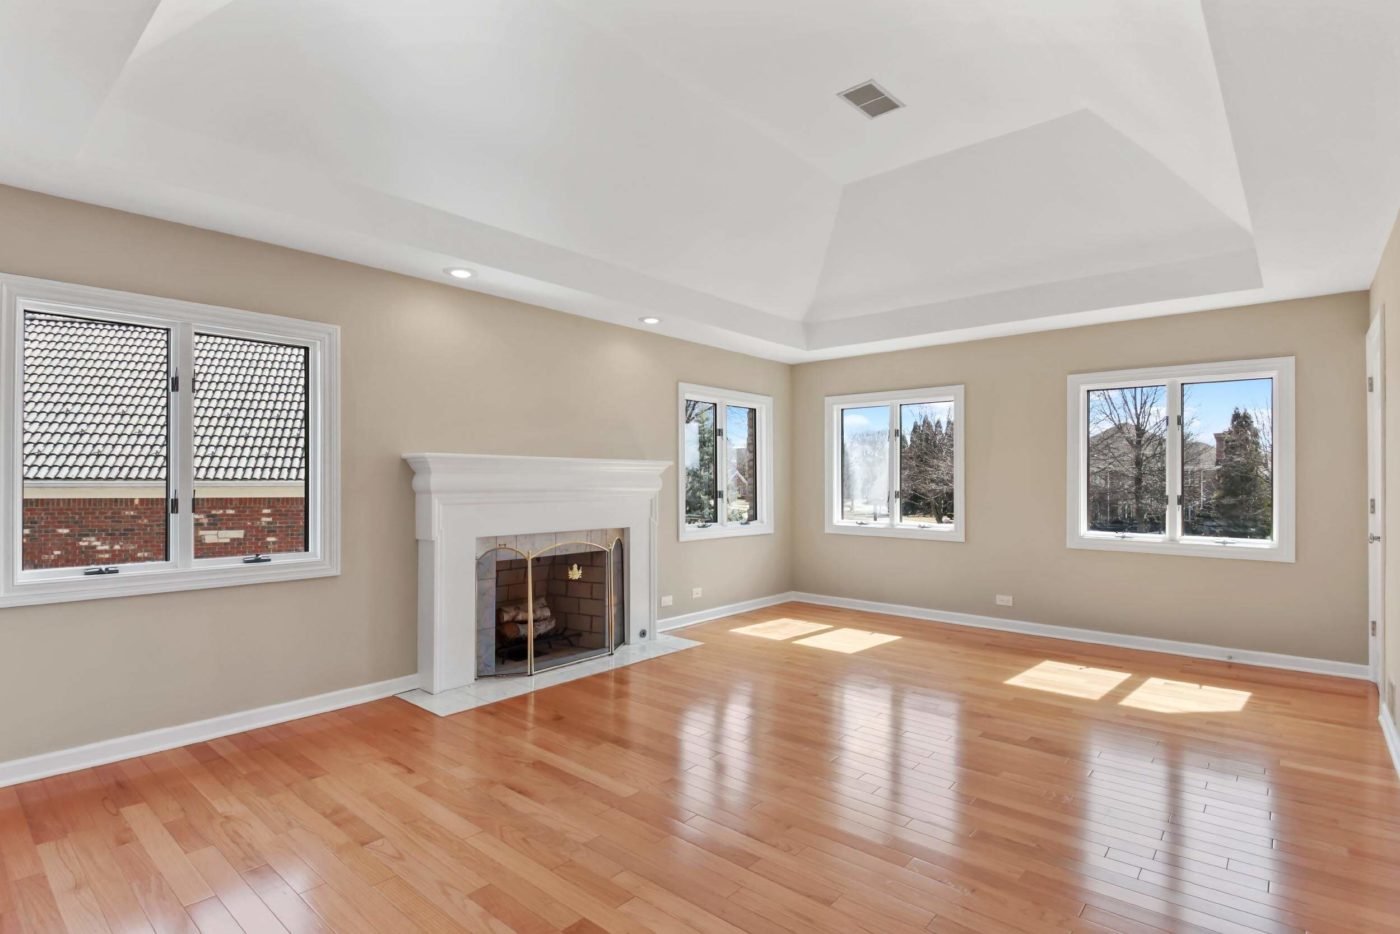 Virtual staging services for real estate photography - empty master bedroom before digital staging